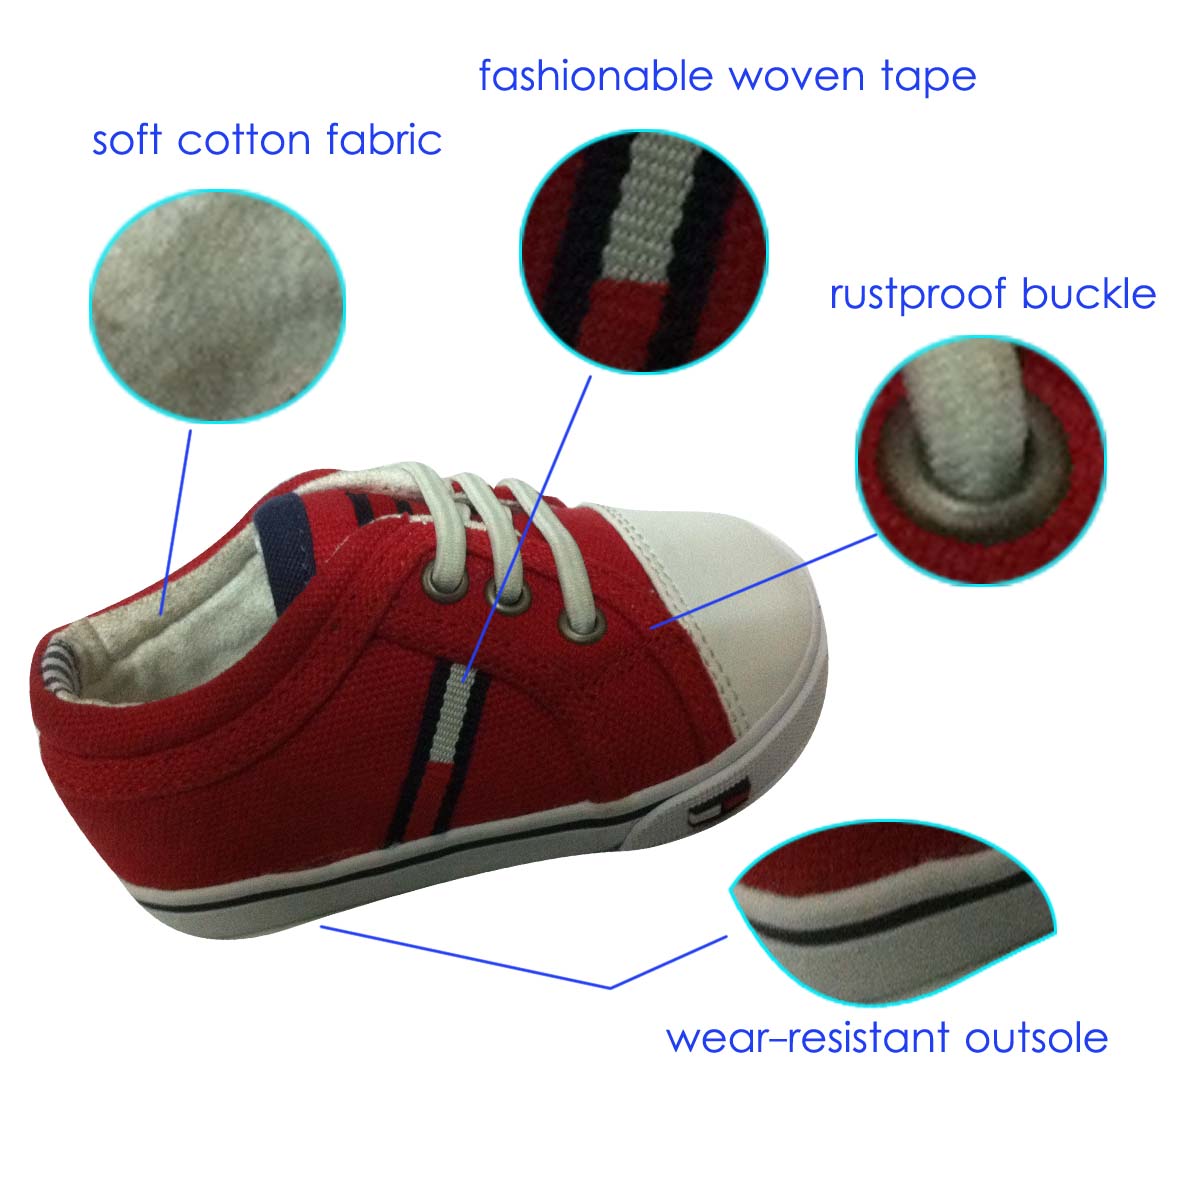 Stylish Comfortable Red Kid Lace up Casual shoes flat baby casual shoes kid canvas shoes